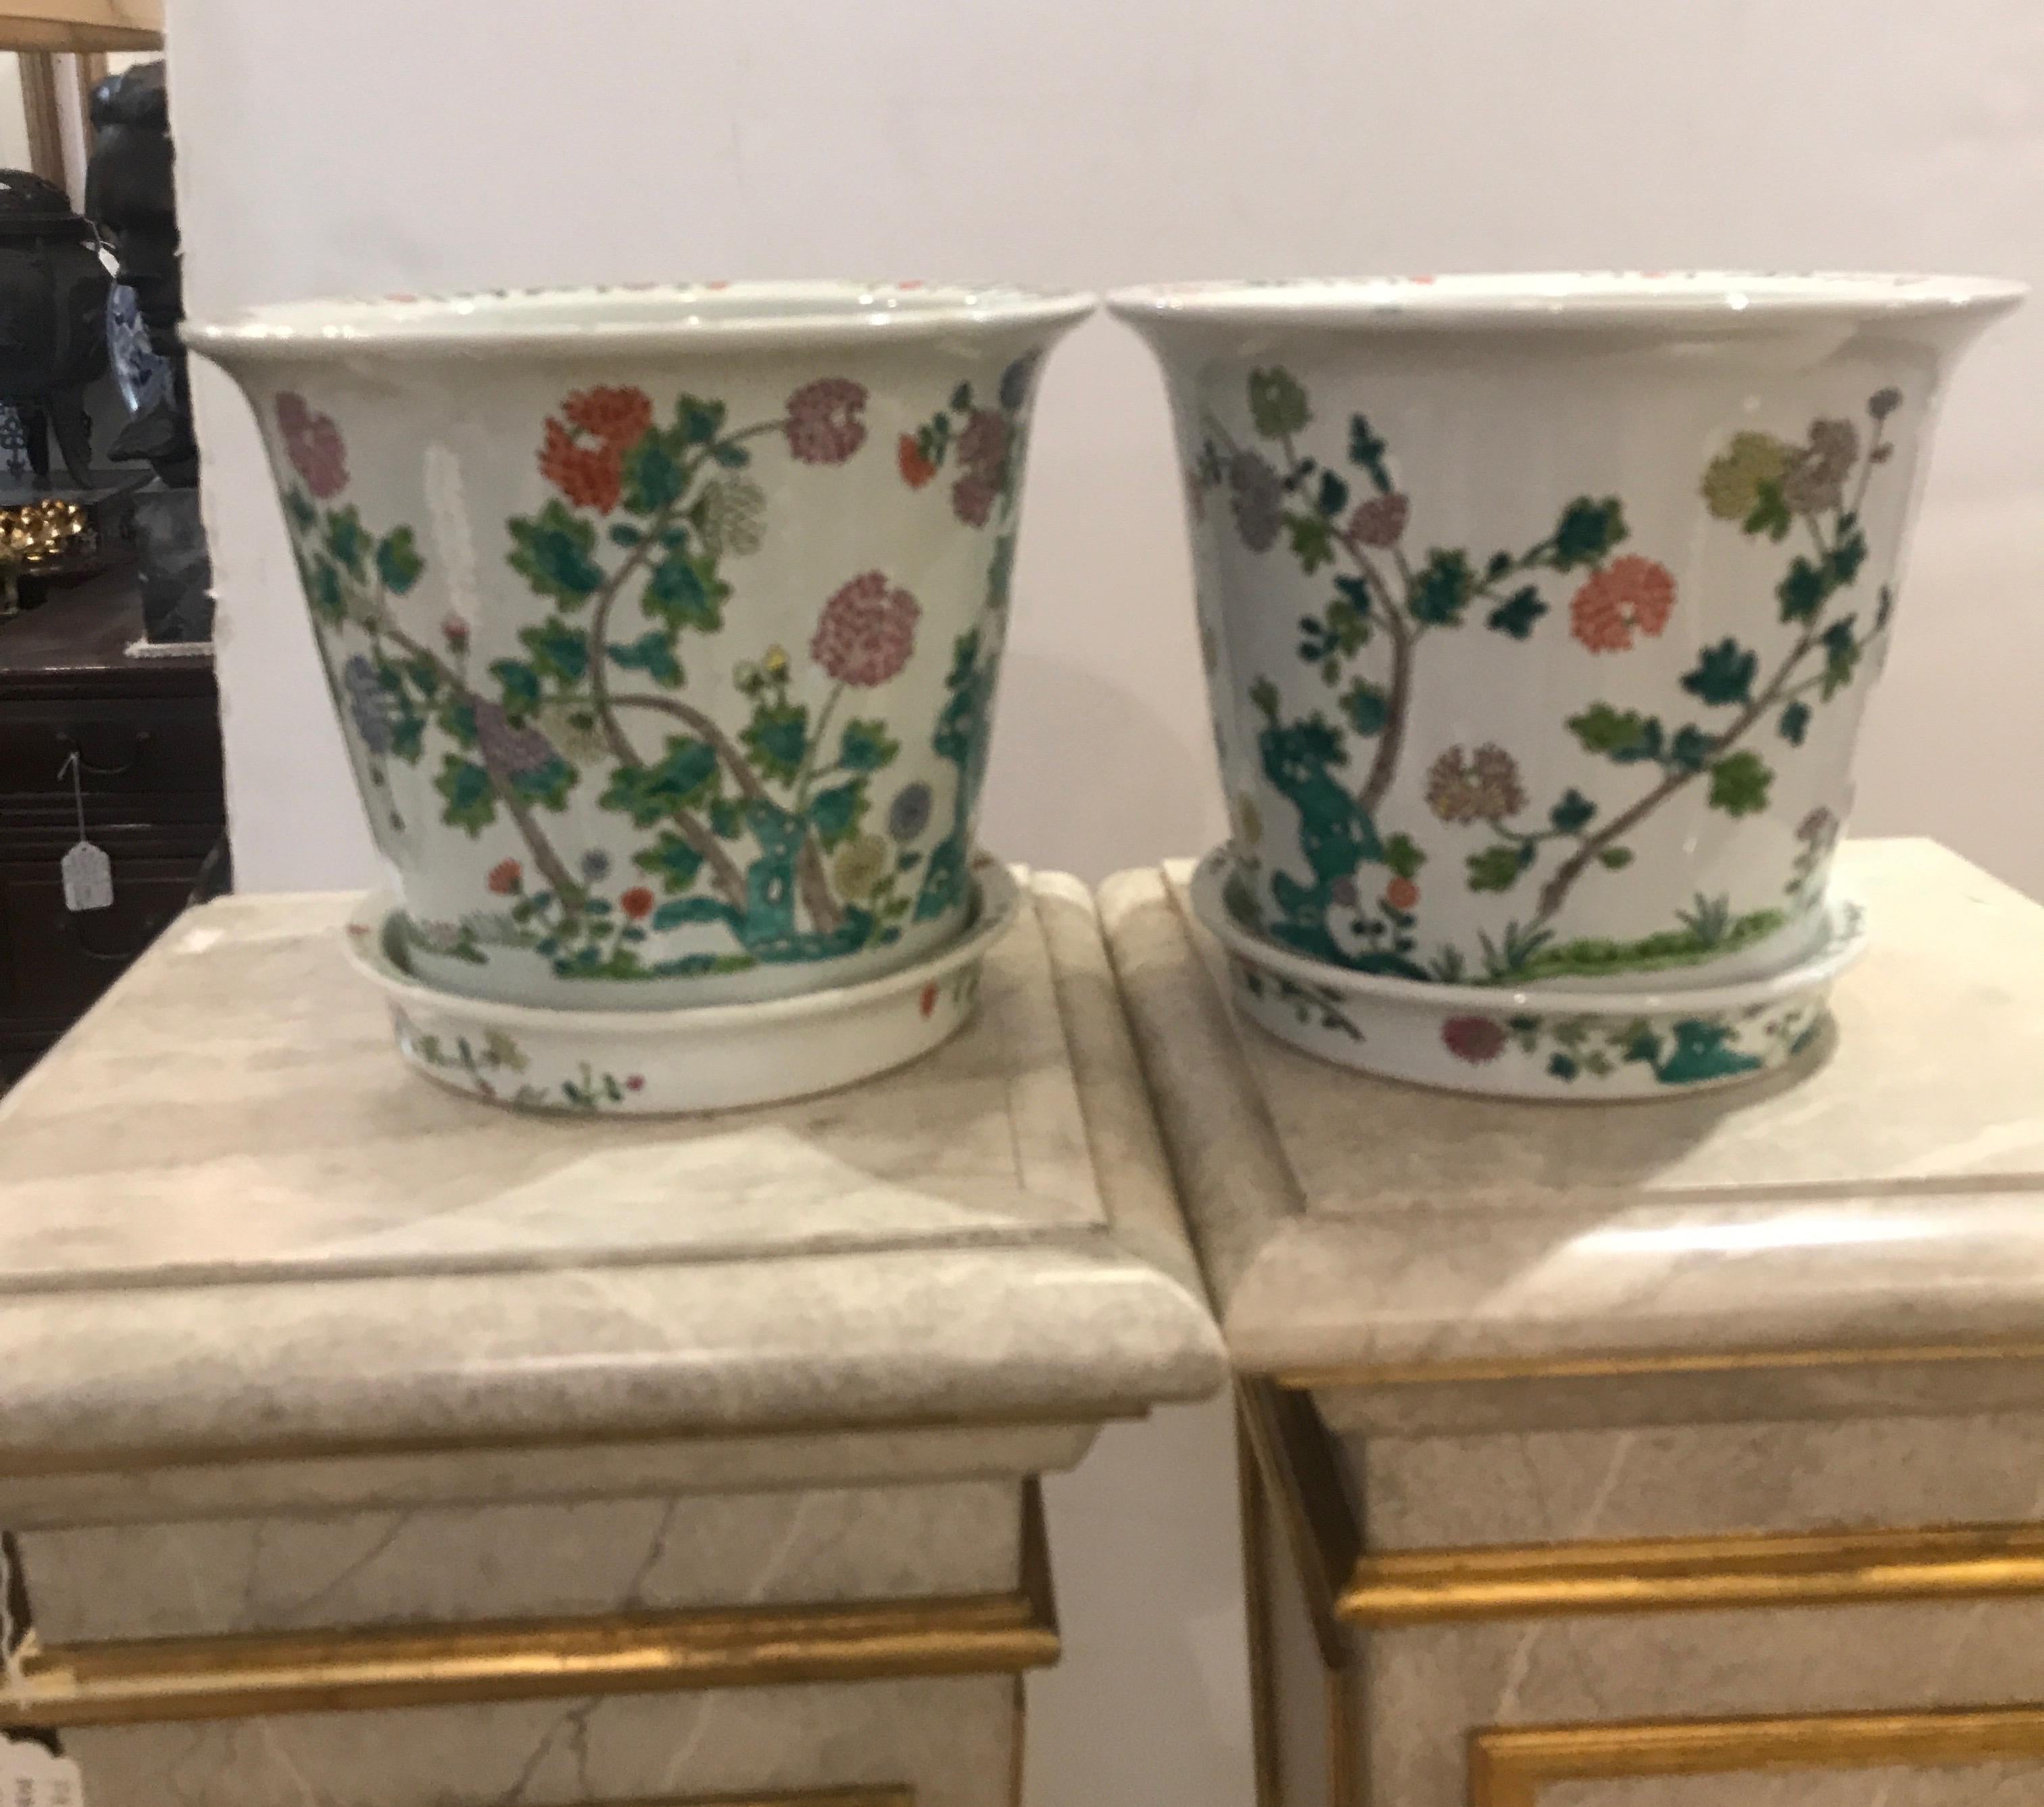 A pair of hand painted Chinese porcelain planters with original underplates. Each one is hand decorated with floral and leaf branches with a white background.